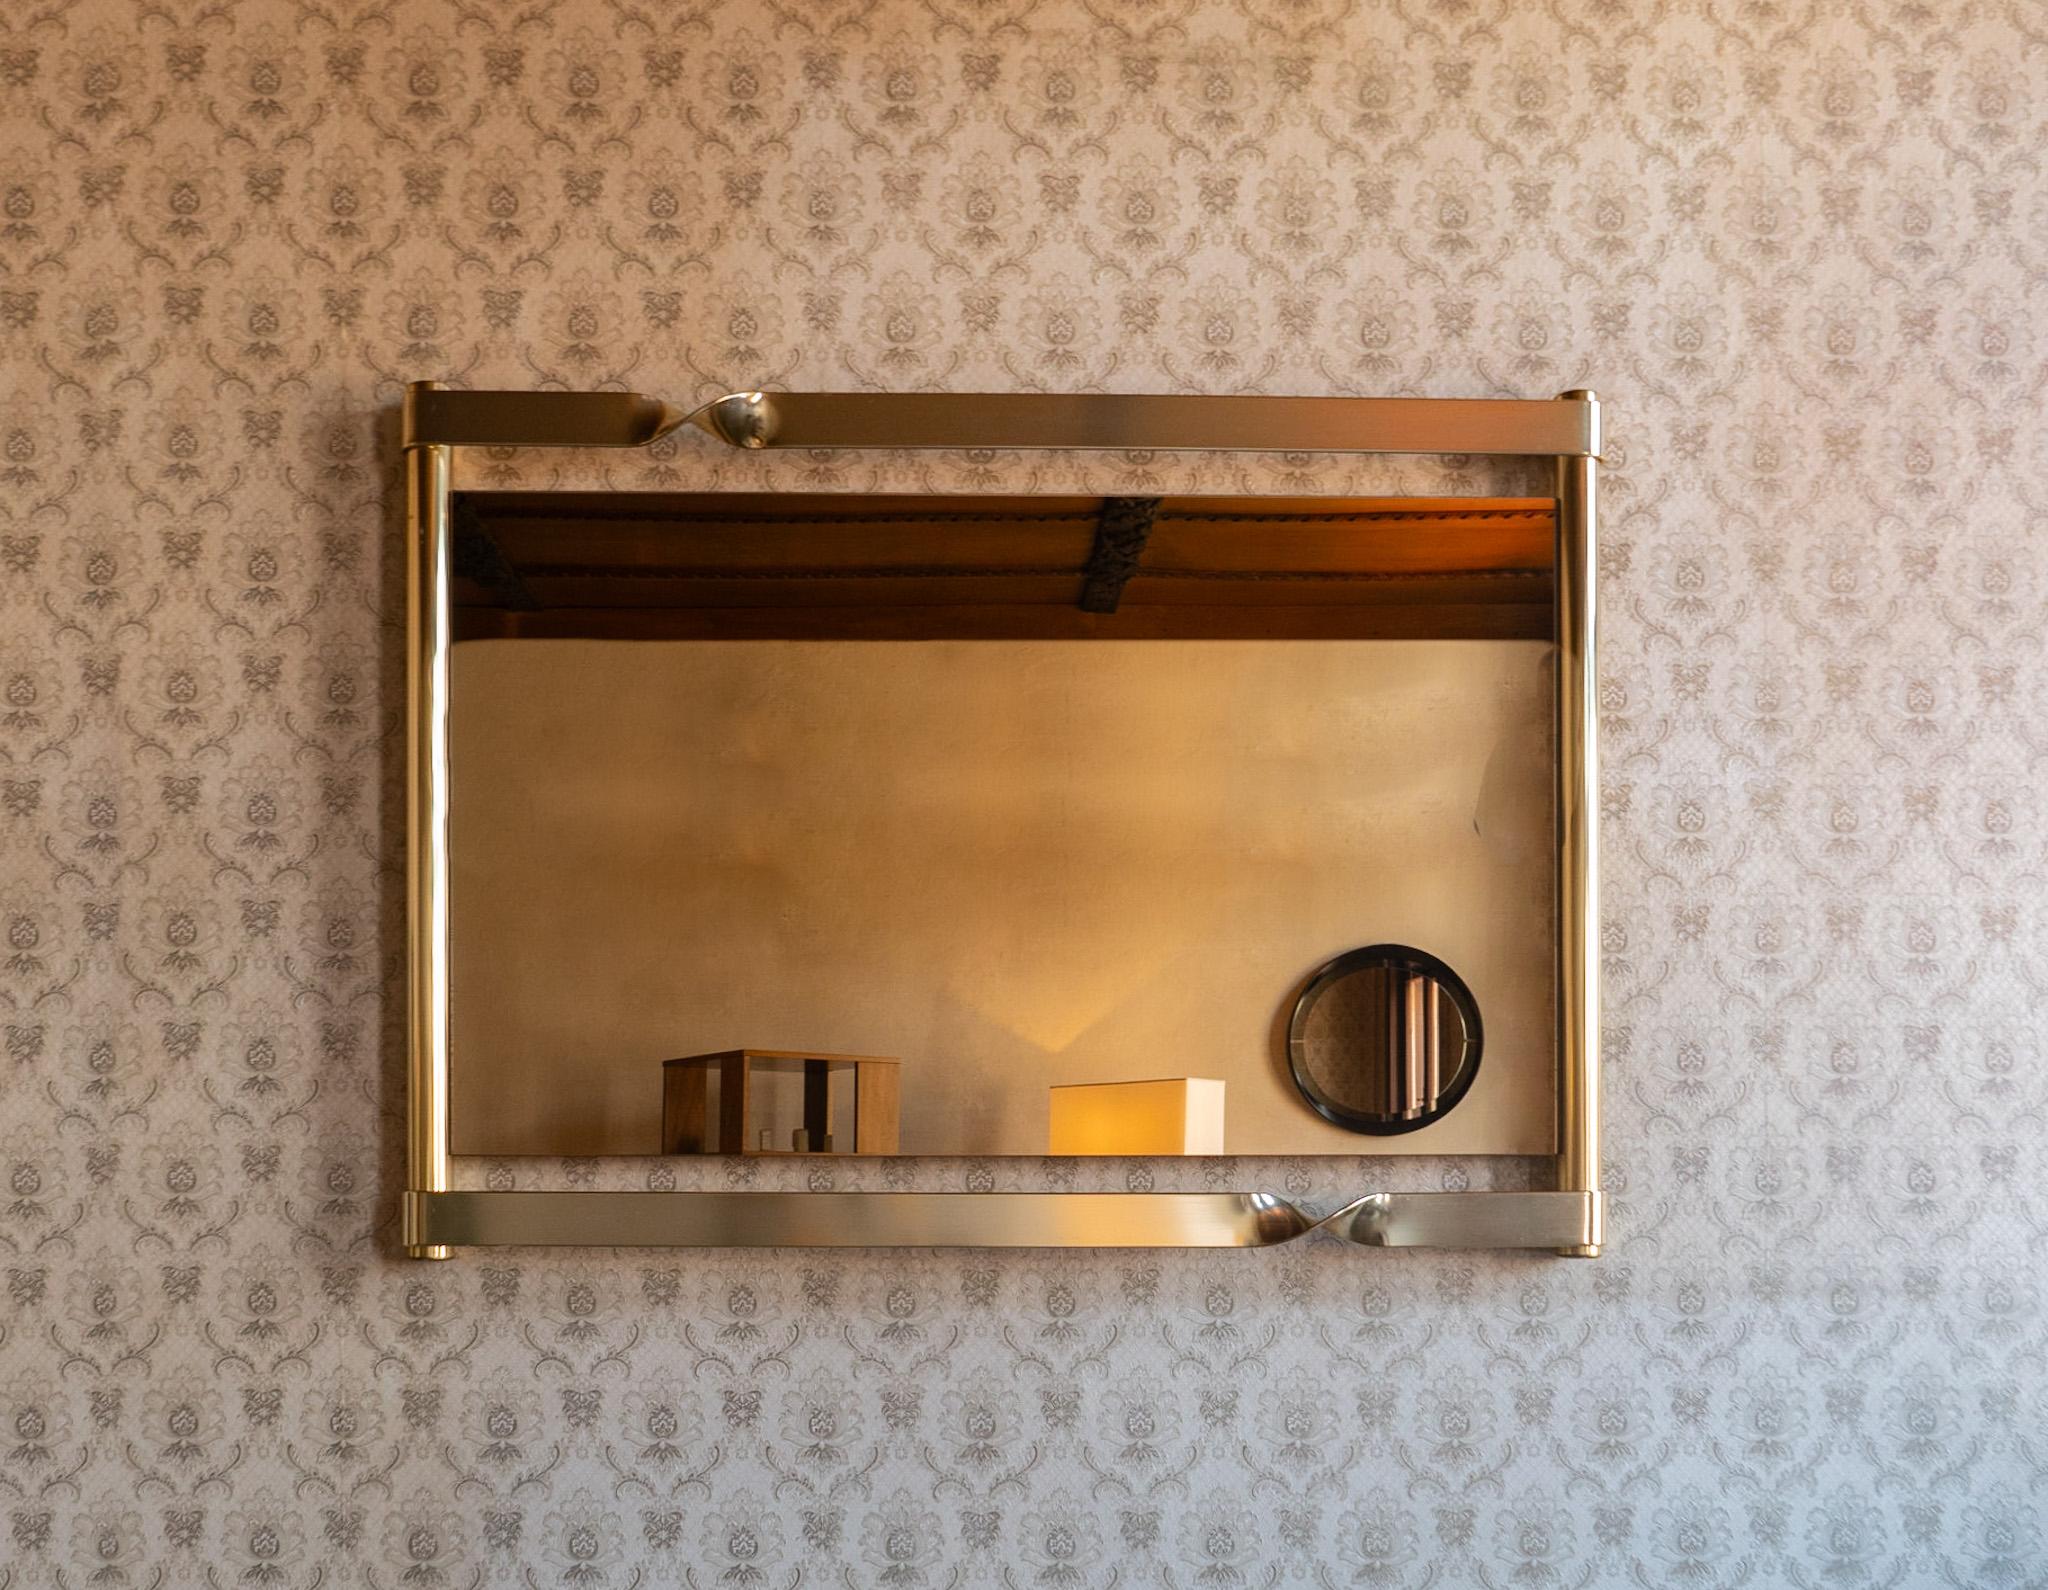 Mid-Century Modern Brass Glass Mirror in the Style of Luciano Frigerio, Italy 1970s.

Introducing a breathtaking statement piece that exudes sophistication and elegance - a large brass  wall mirror with curved elements and smoked glass, inspired by